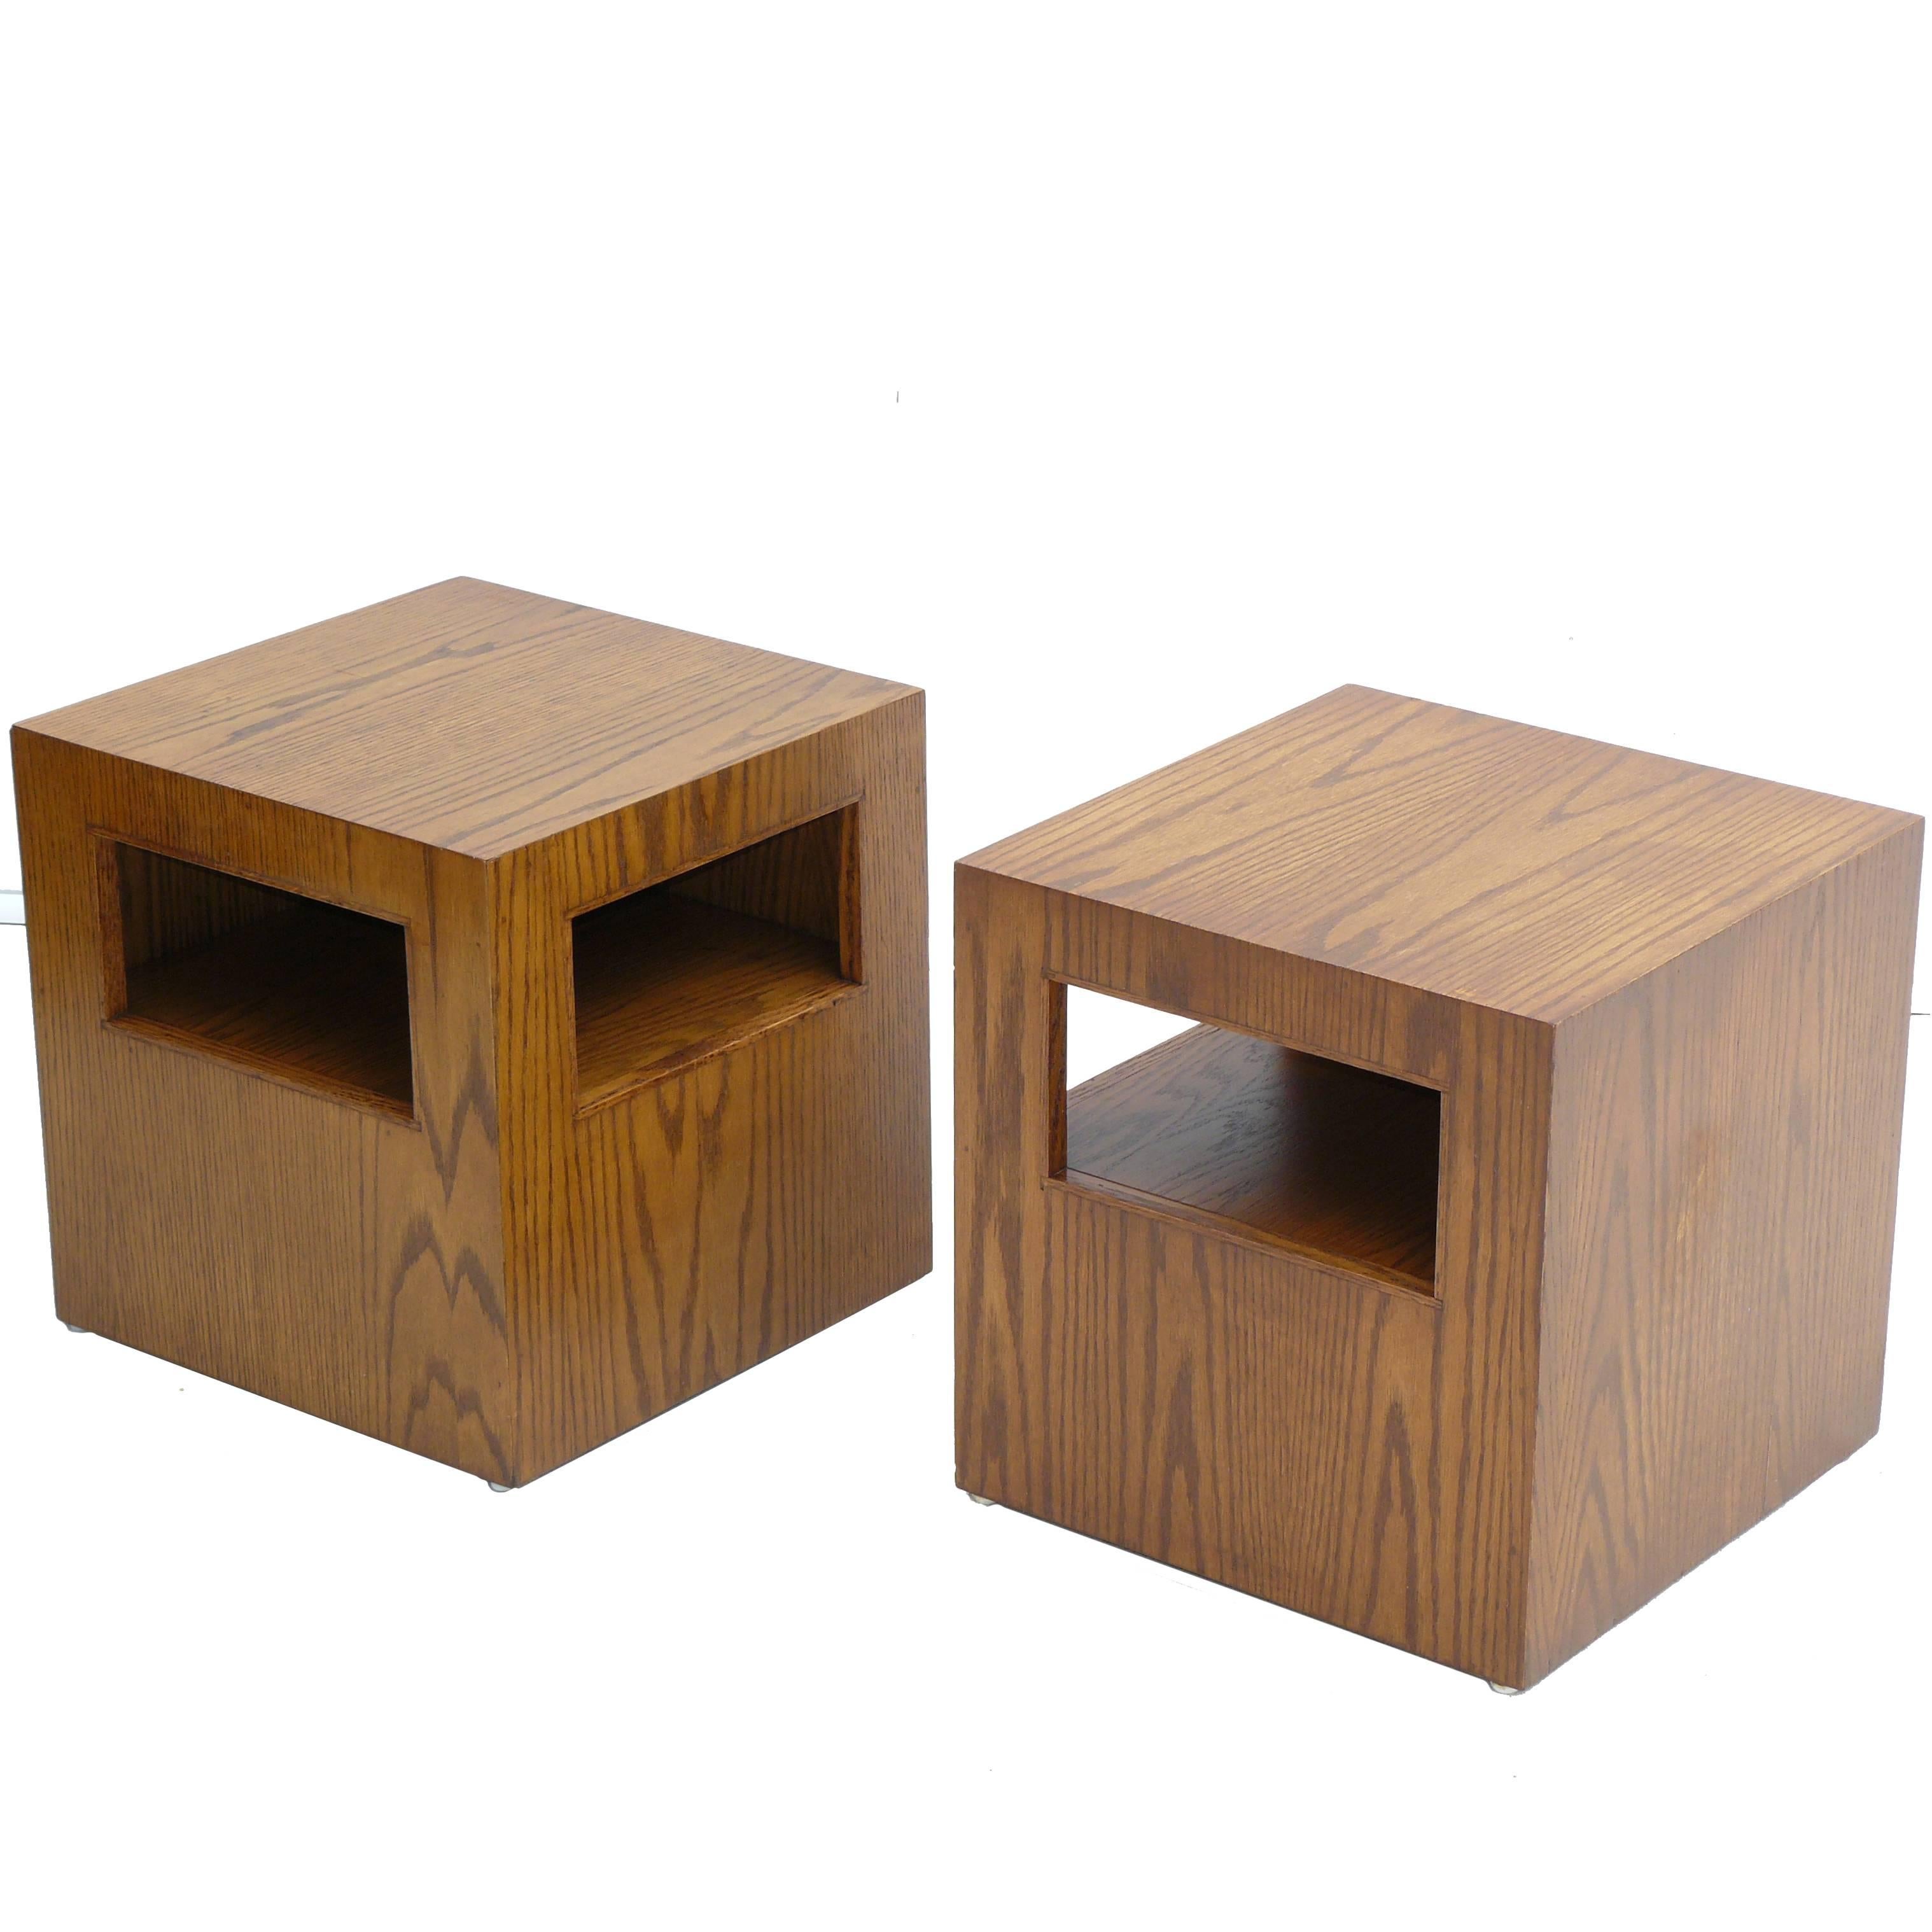 Pair of 1960s Ash Plywood Stools or Tables from an Architect's Estate For Sale